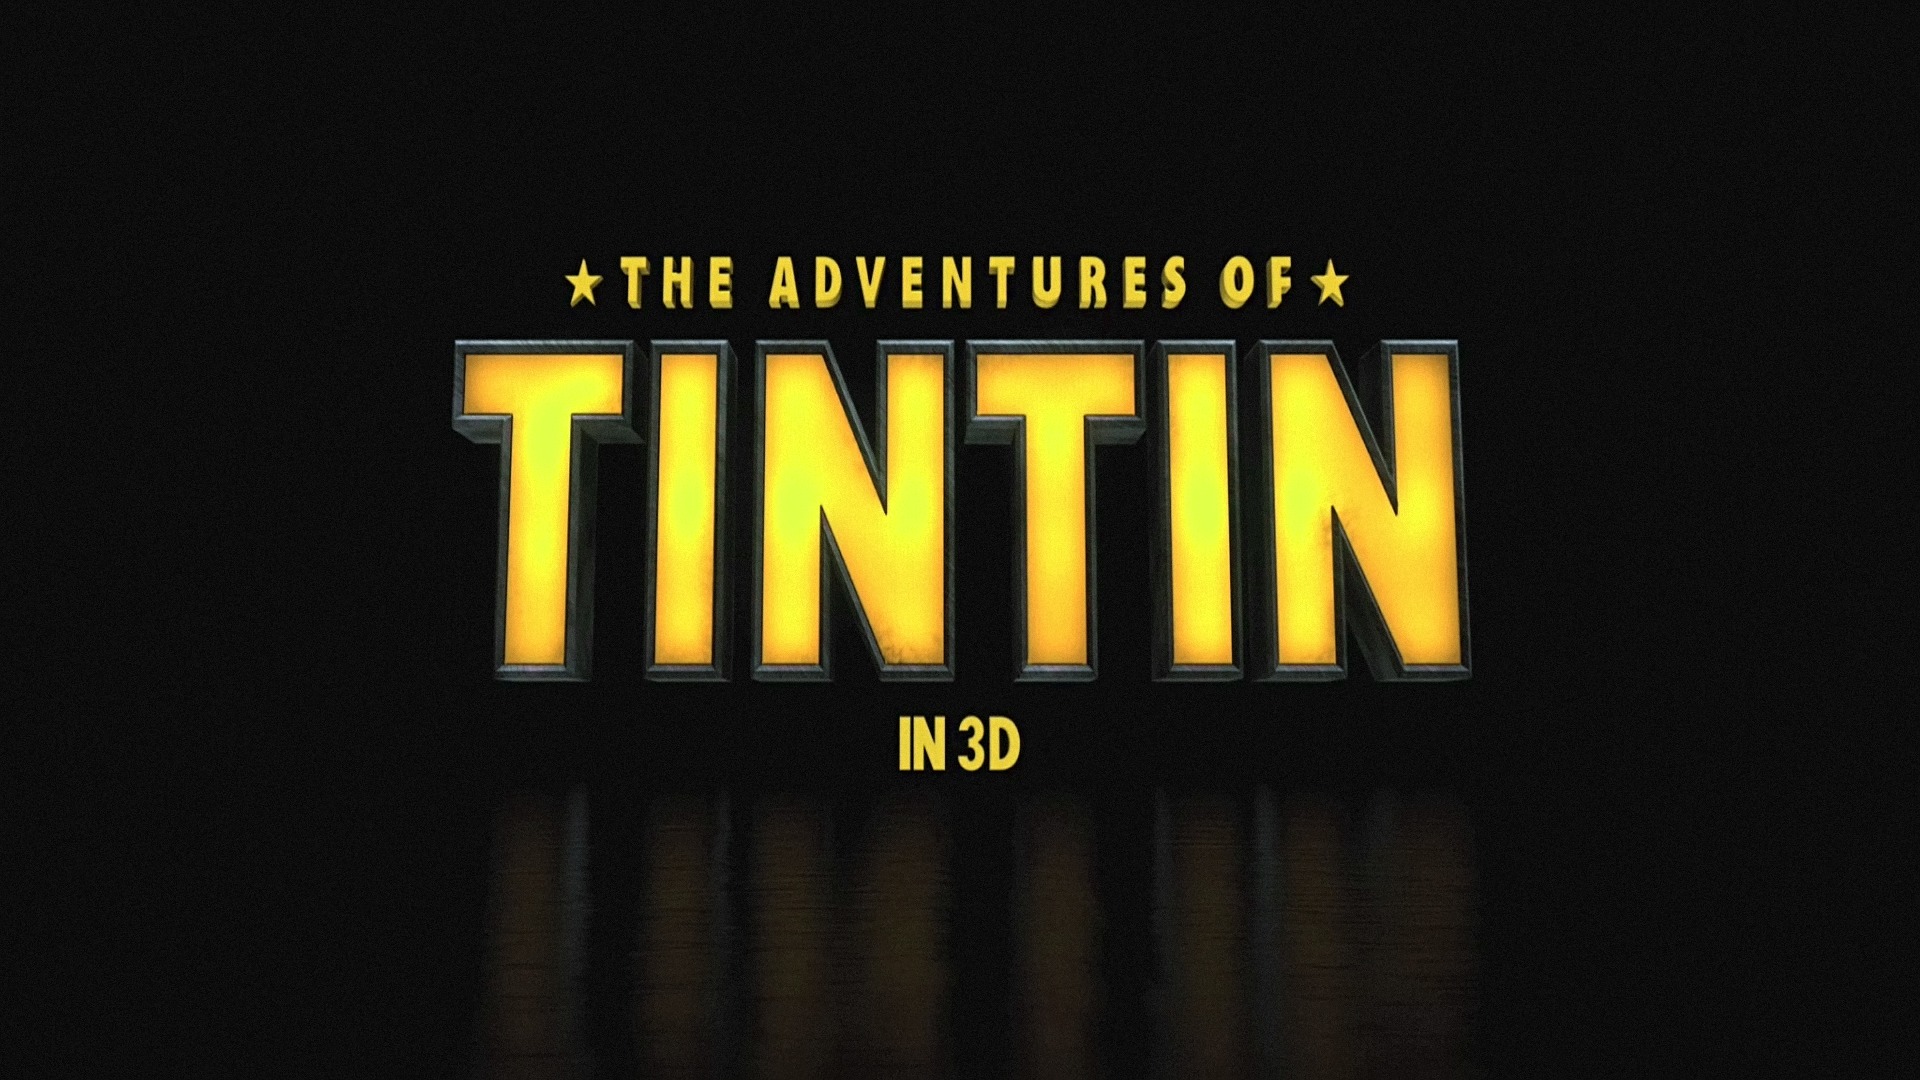 The Adventures of Tintin HD Wallpapers #14 - 1920x1080